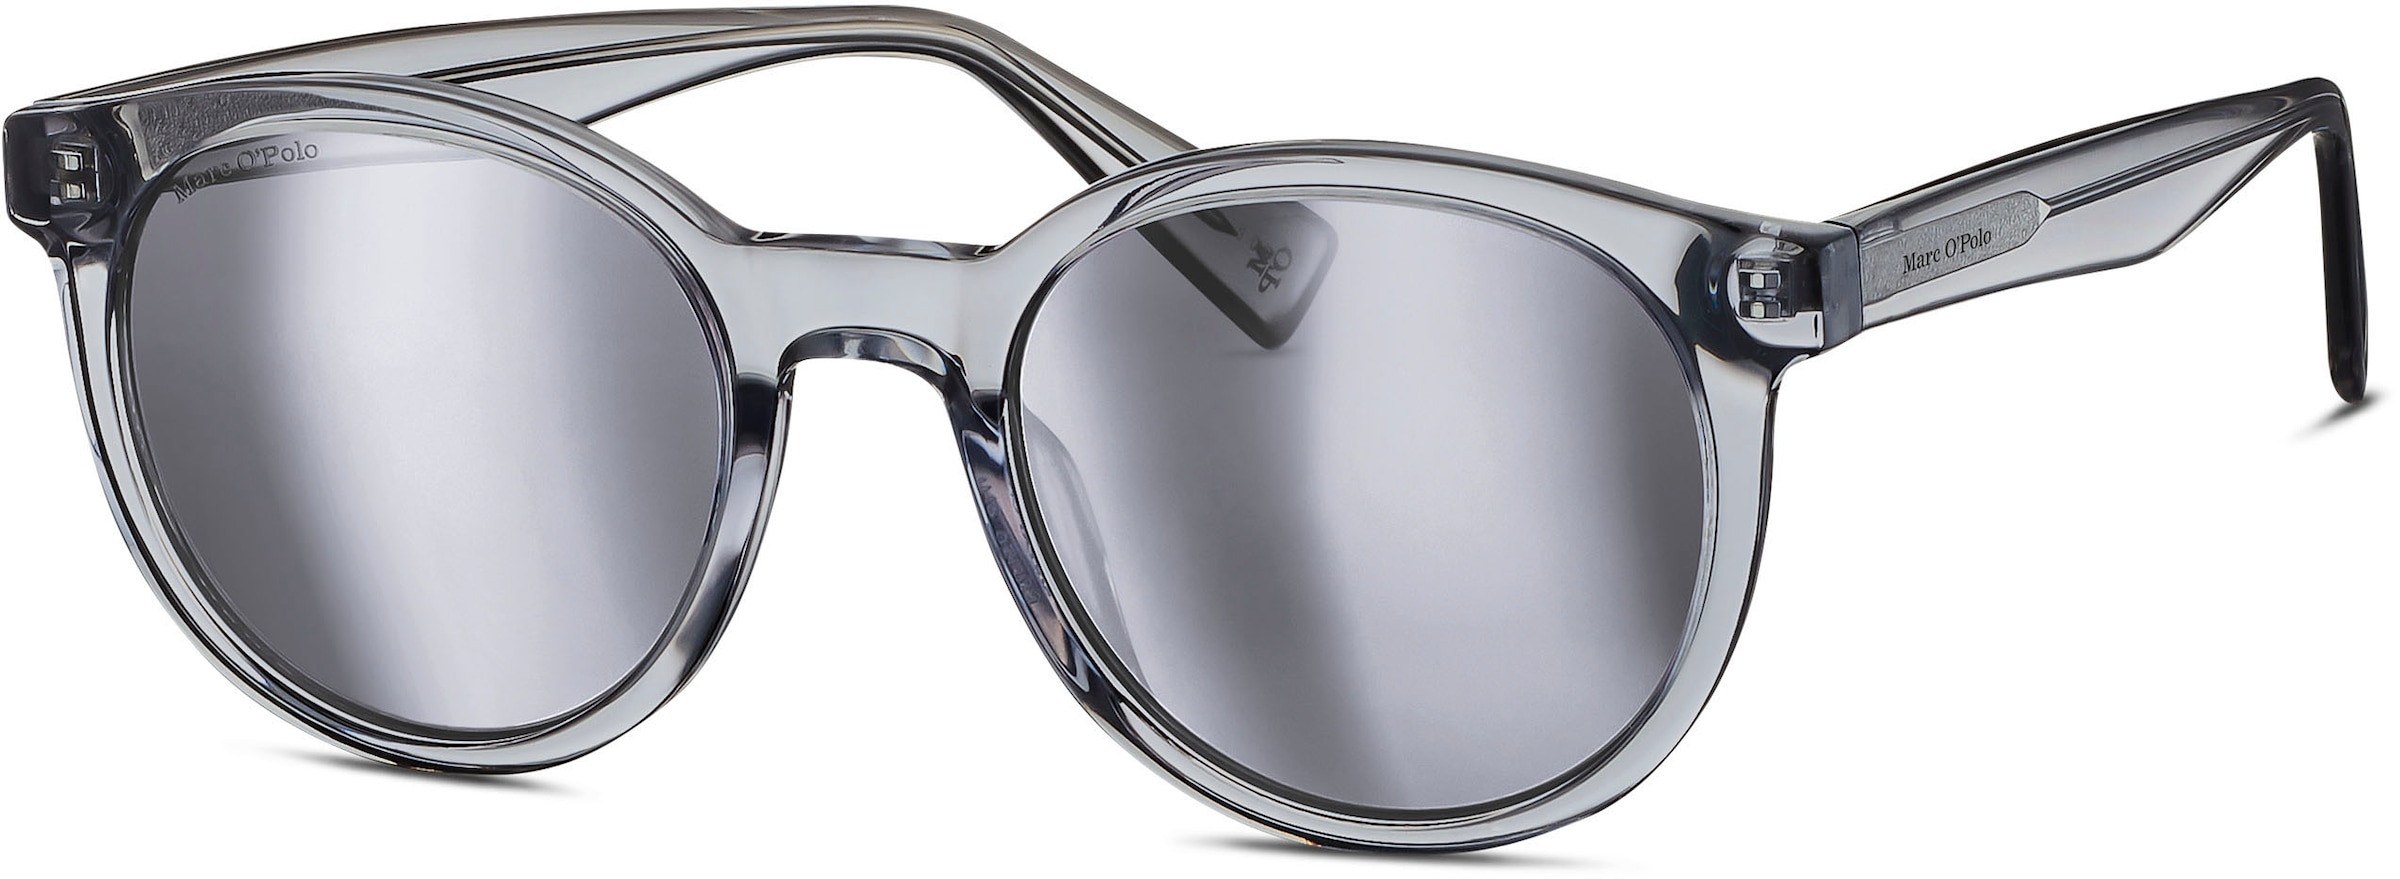 Marc OPolo Sonnenbrille "Modell 506185", Panto-Form